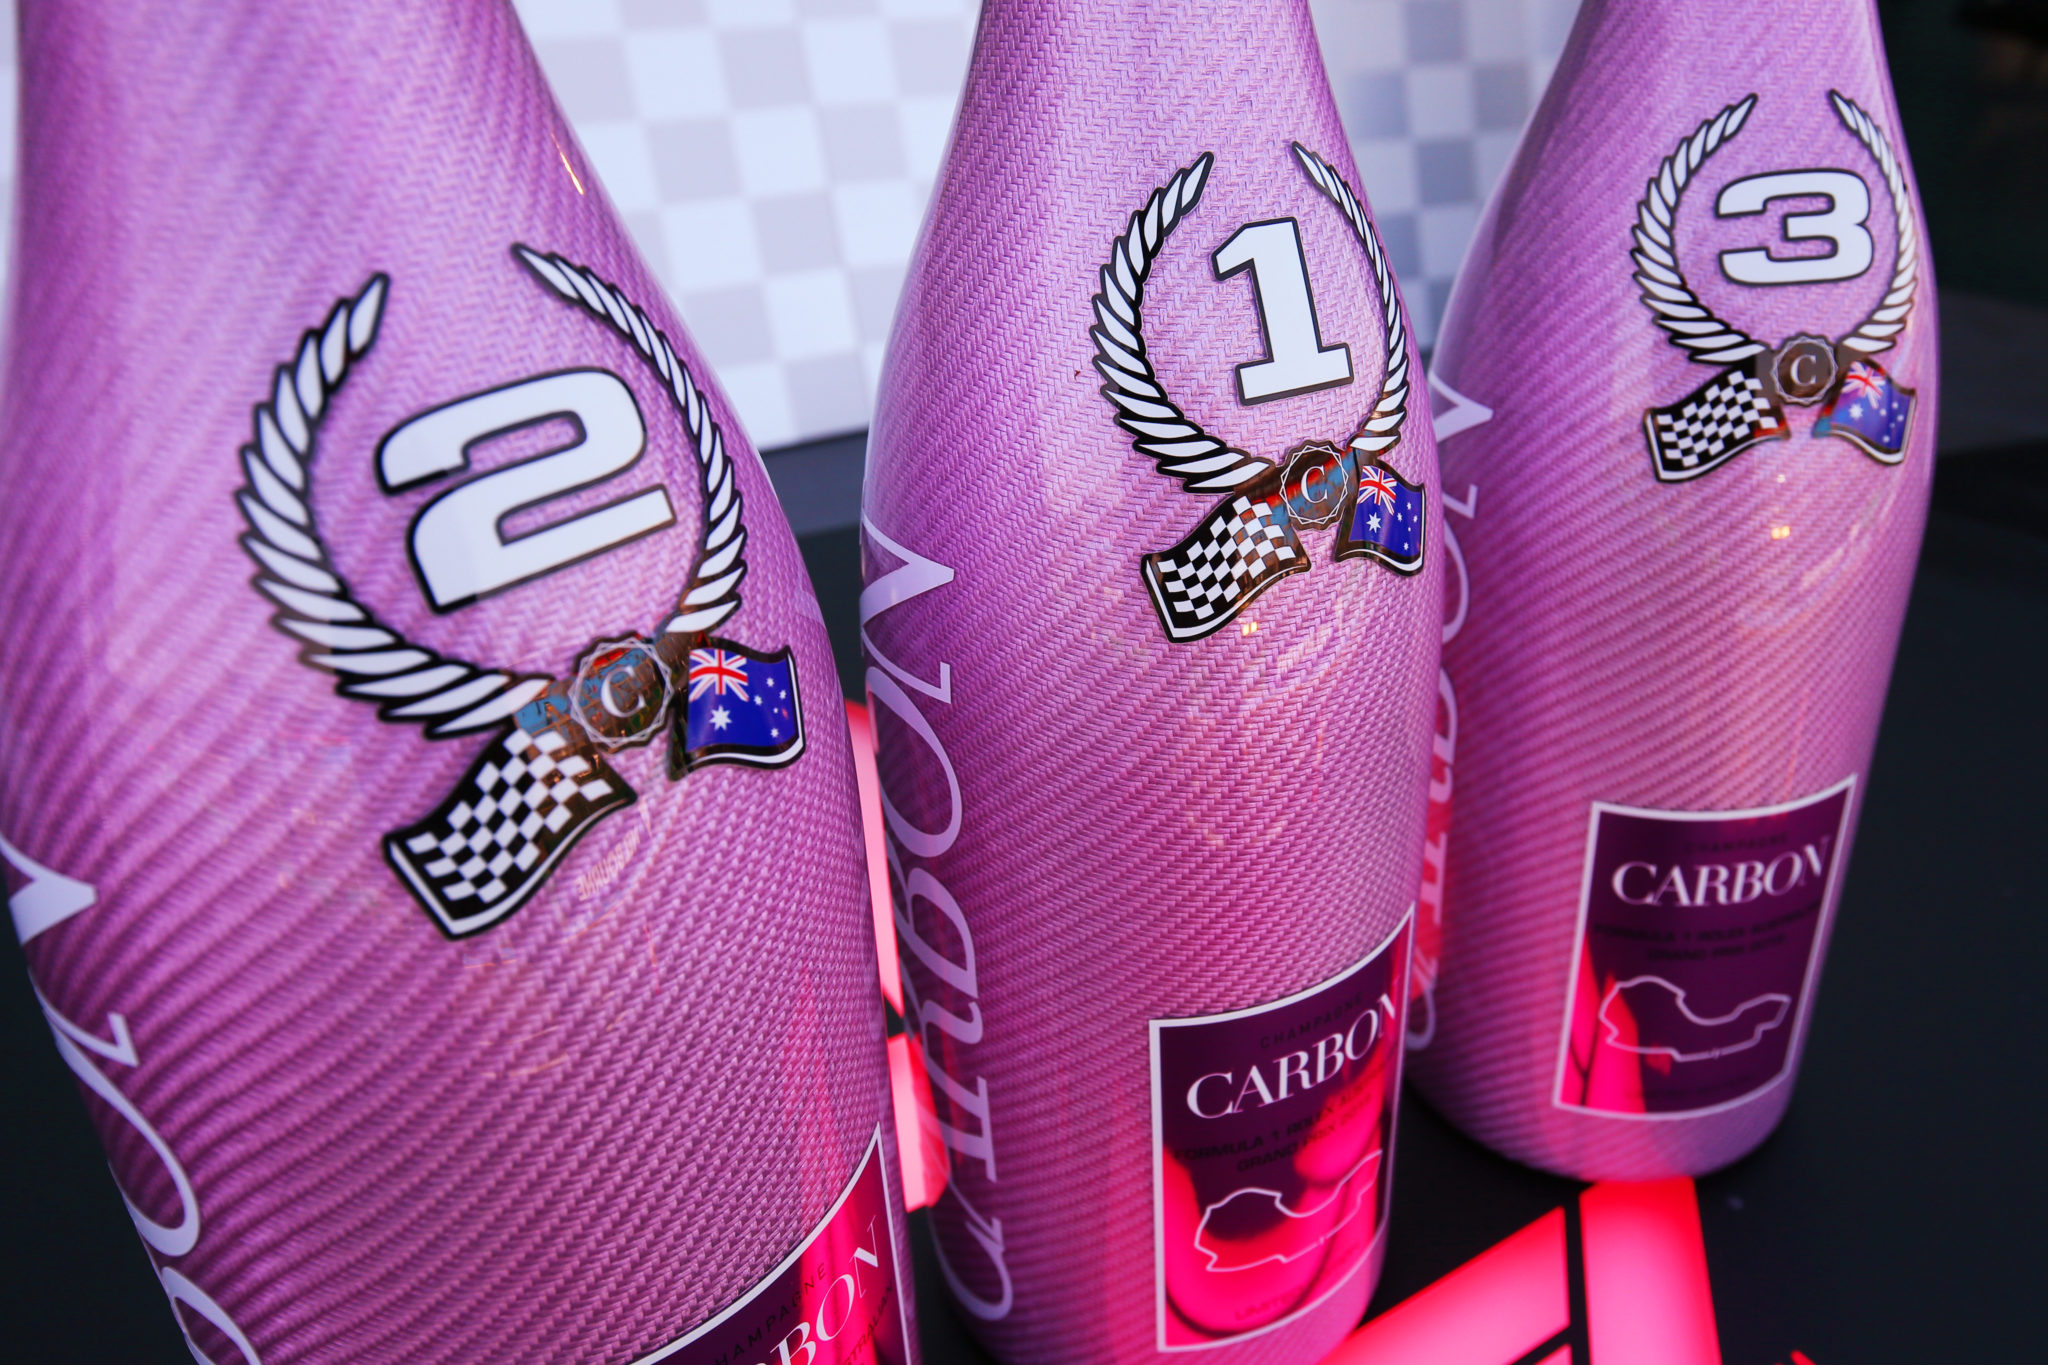 The Official Champagne Bottle for the Formula 1 Grand Prix De Monaco 2019  is in the Pink to Support the Fight Against Breast Cancer - Rhapsody  Magazine